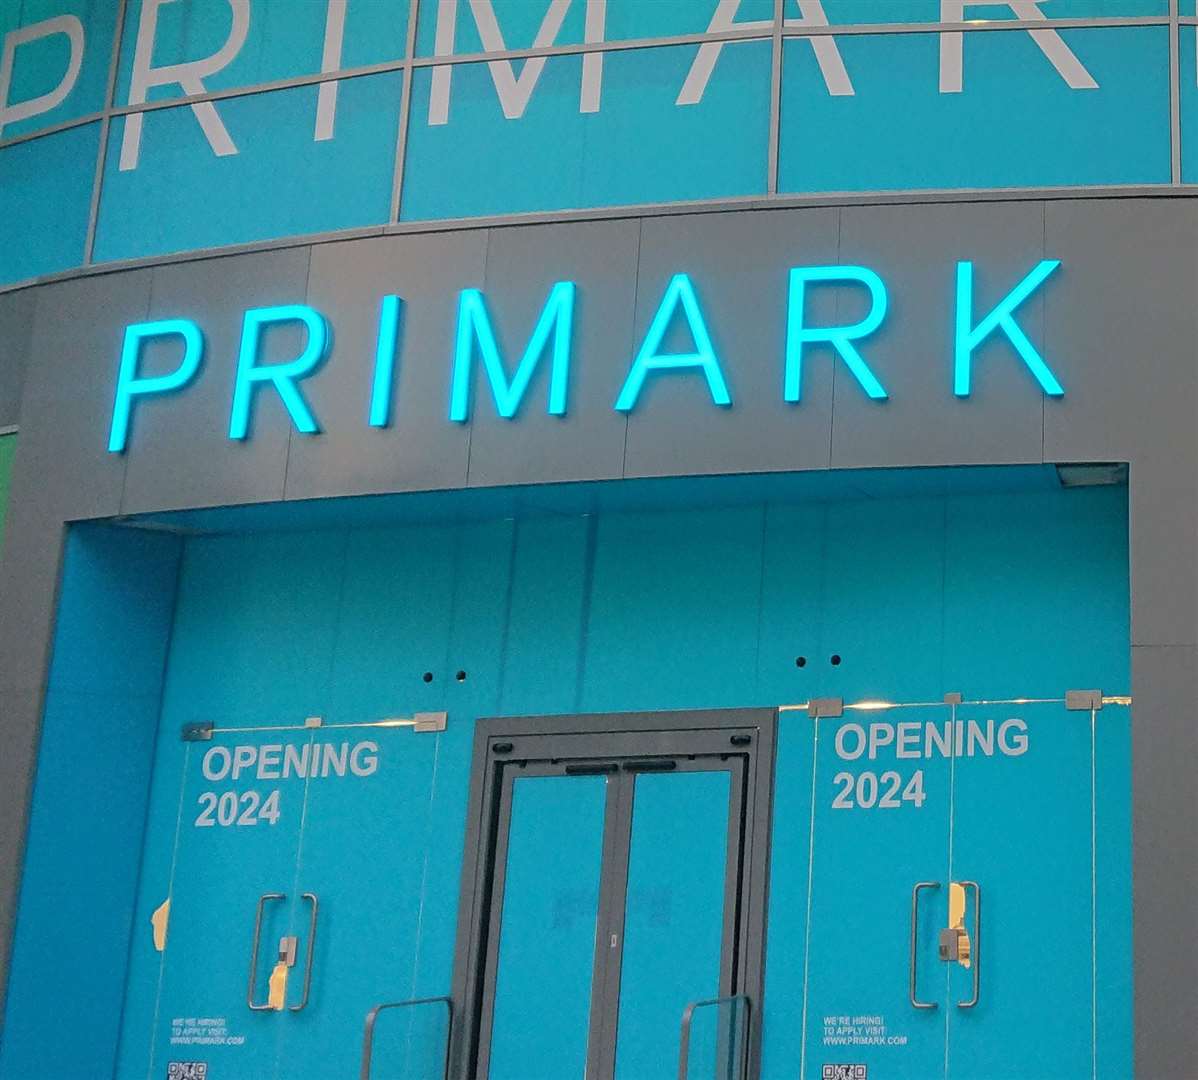 Ashford residents have long called for Primark to open in the town